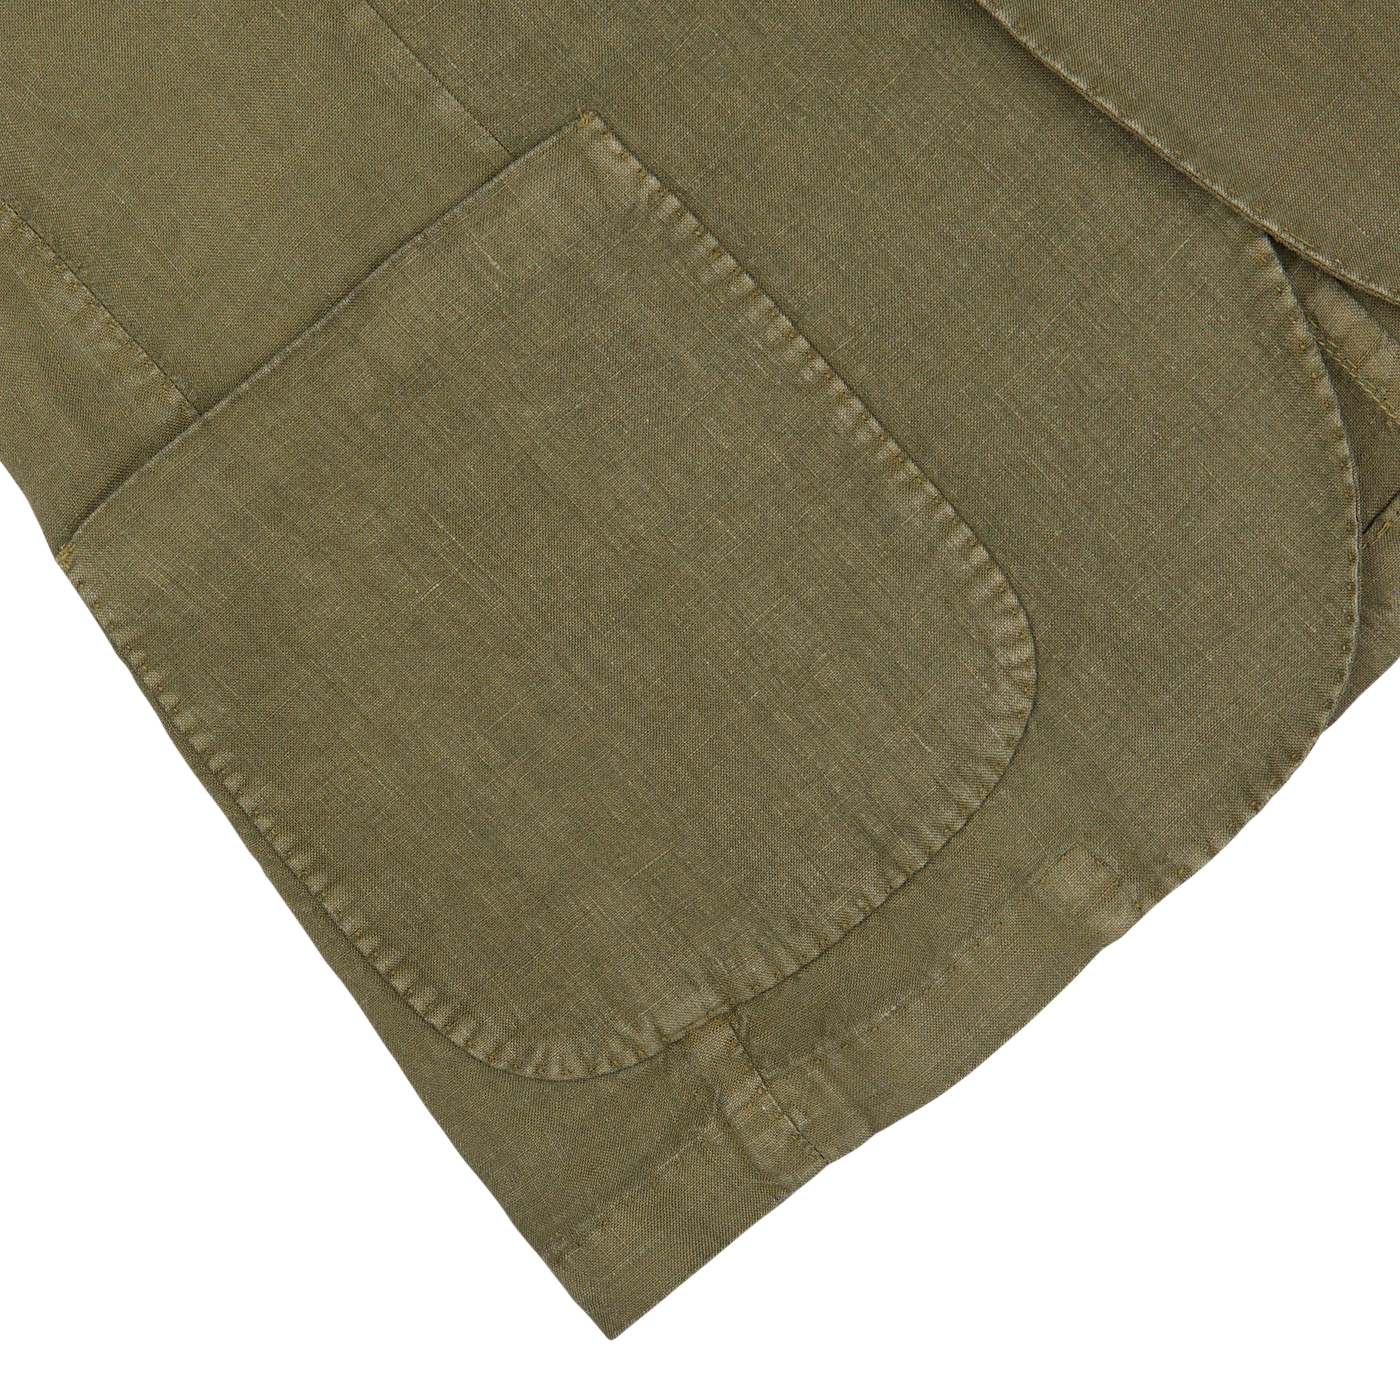 Close-up of a Grass Green Washed Linen Blazer with a blazer pocket detail on a white background by L.B.M. 1911.